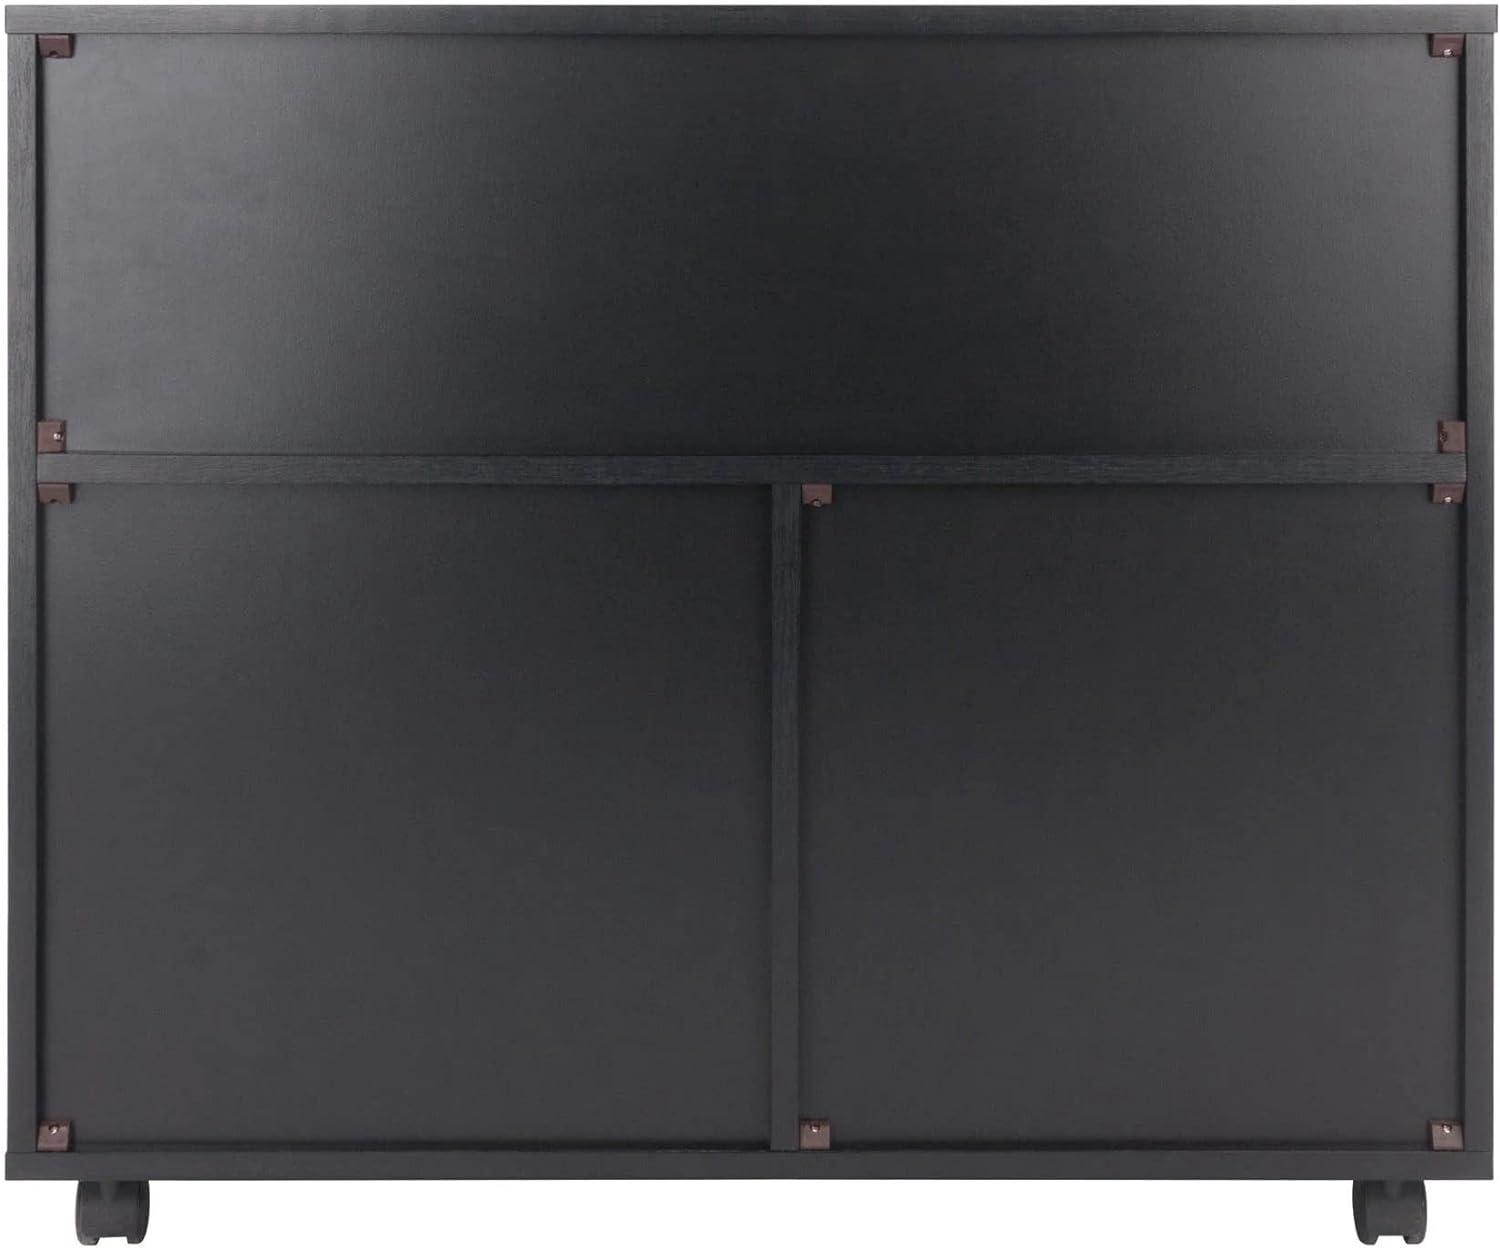 Winsome Wood Halifax Cabinet/Cupboard, 2 Large Drawer with 3 Small Drawer, Black